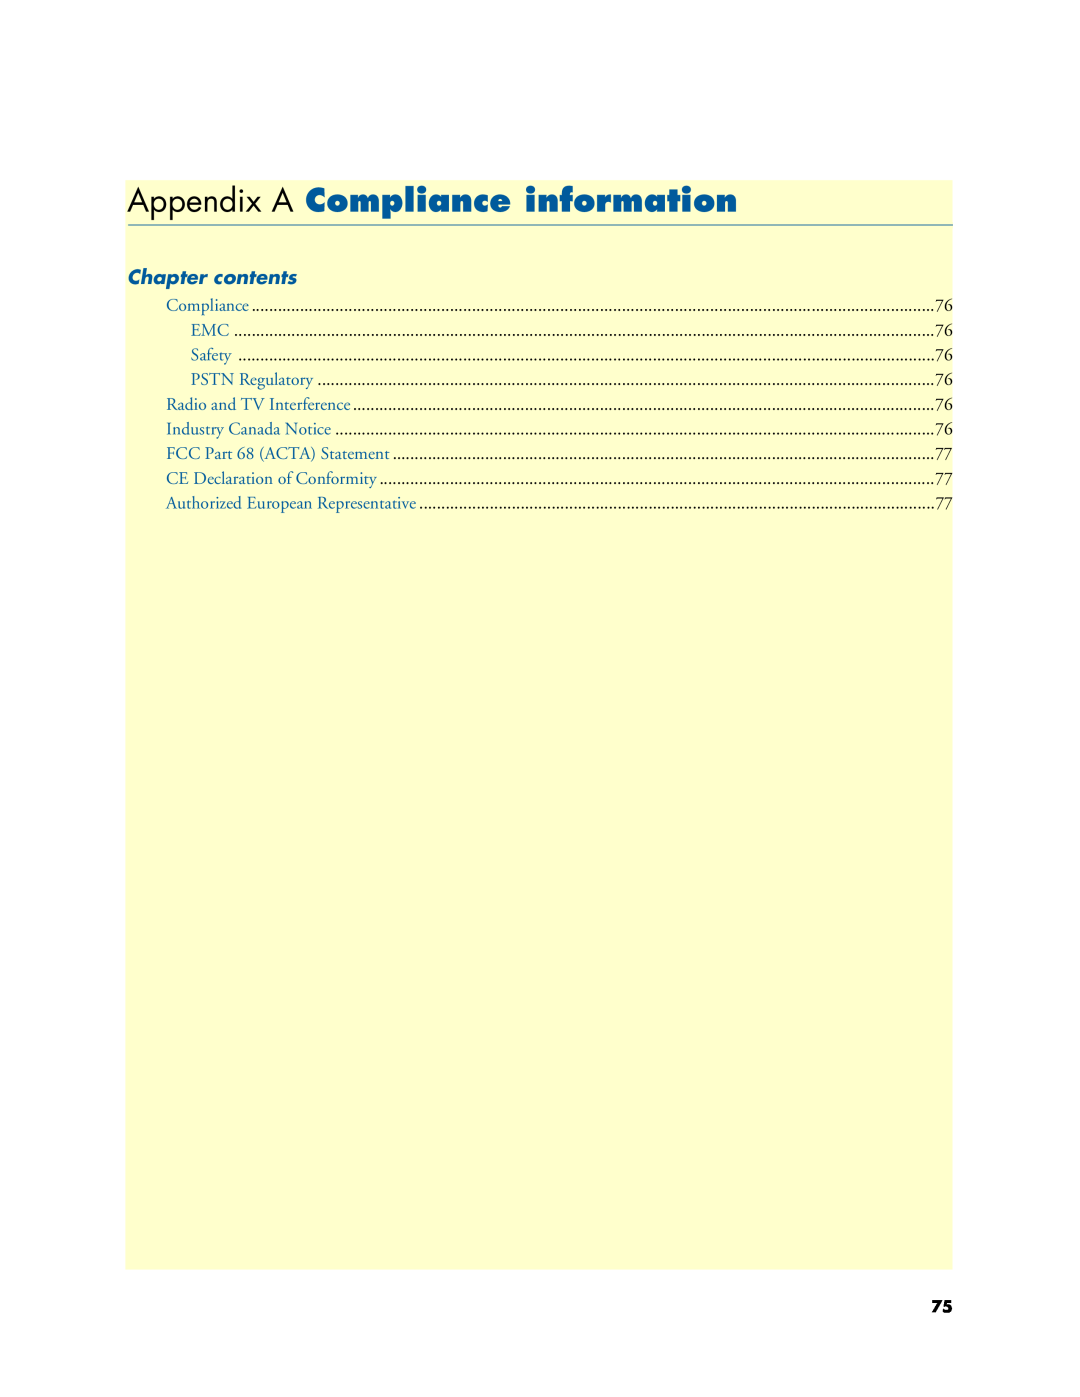 Patton electronic 2616RC user manual Appendix A Compliance information, Chapter contents, Safety, PSTN Regulatory 